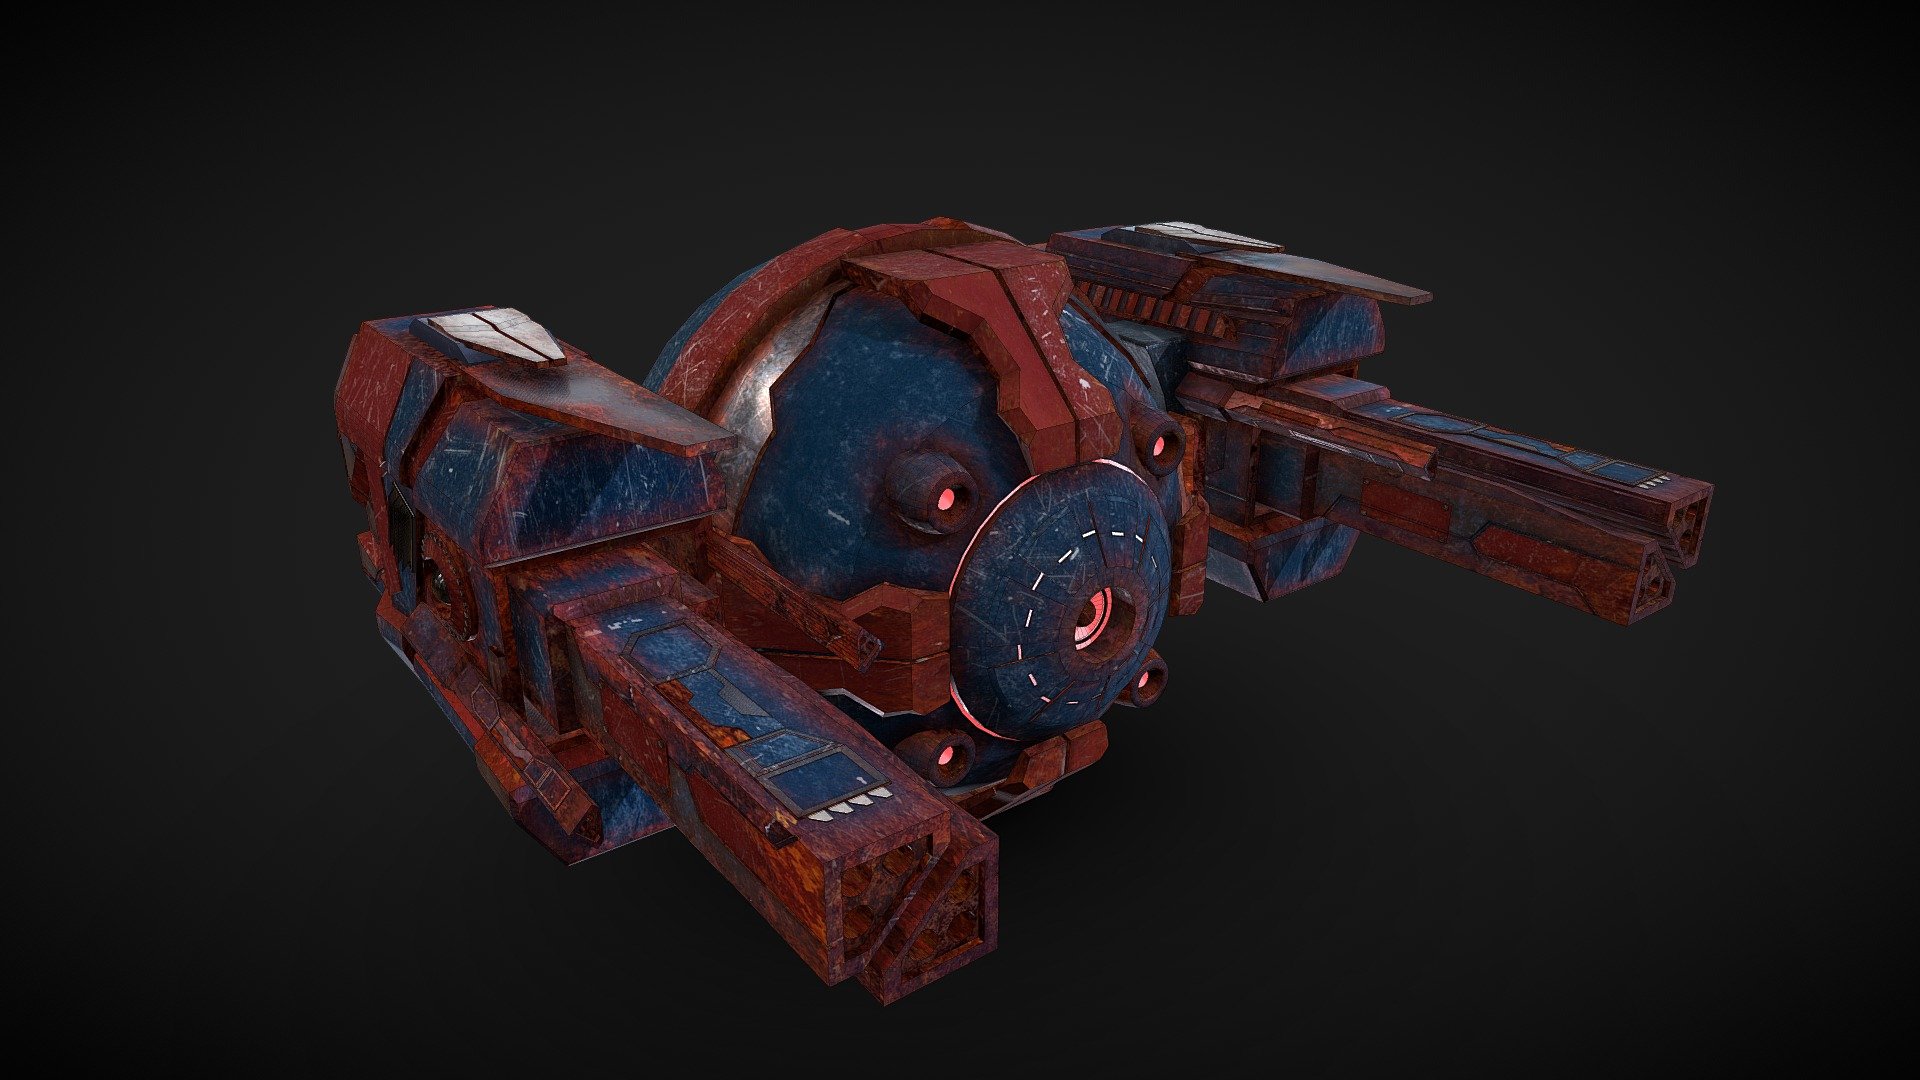 This is a sci-fi drone i've been working on for the last few days.
it is seperated into:
* the main body
* the first gun
* the second gun
* a part of the main body in the back

I hope you like it and I could help you with your project!
check out my other models on my account!

Have a good day ( : - Rusty sci-fi drone - Download Free 3D model by Schwaeli 3d model